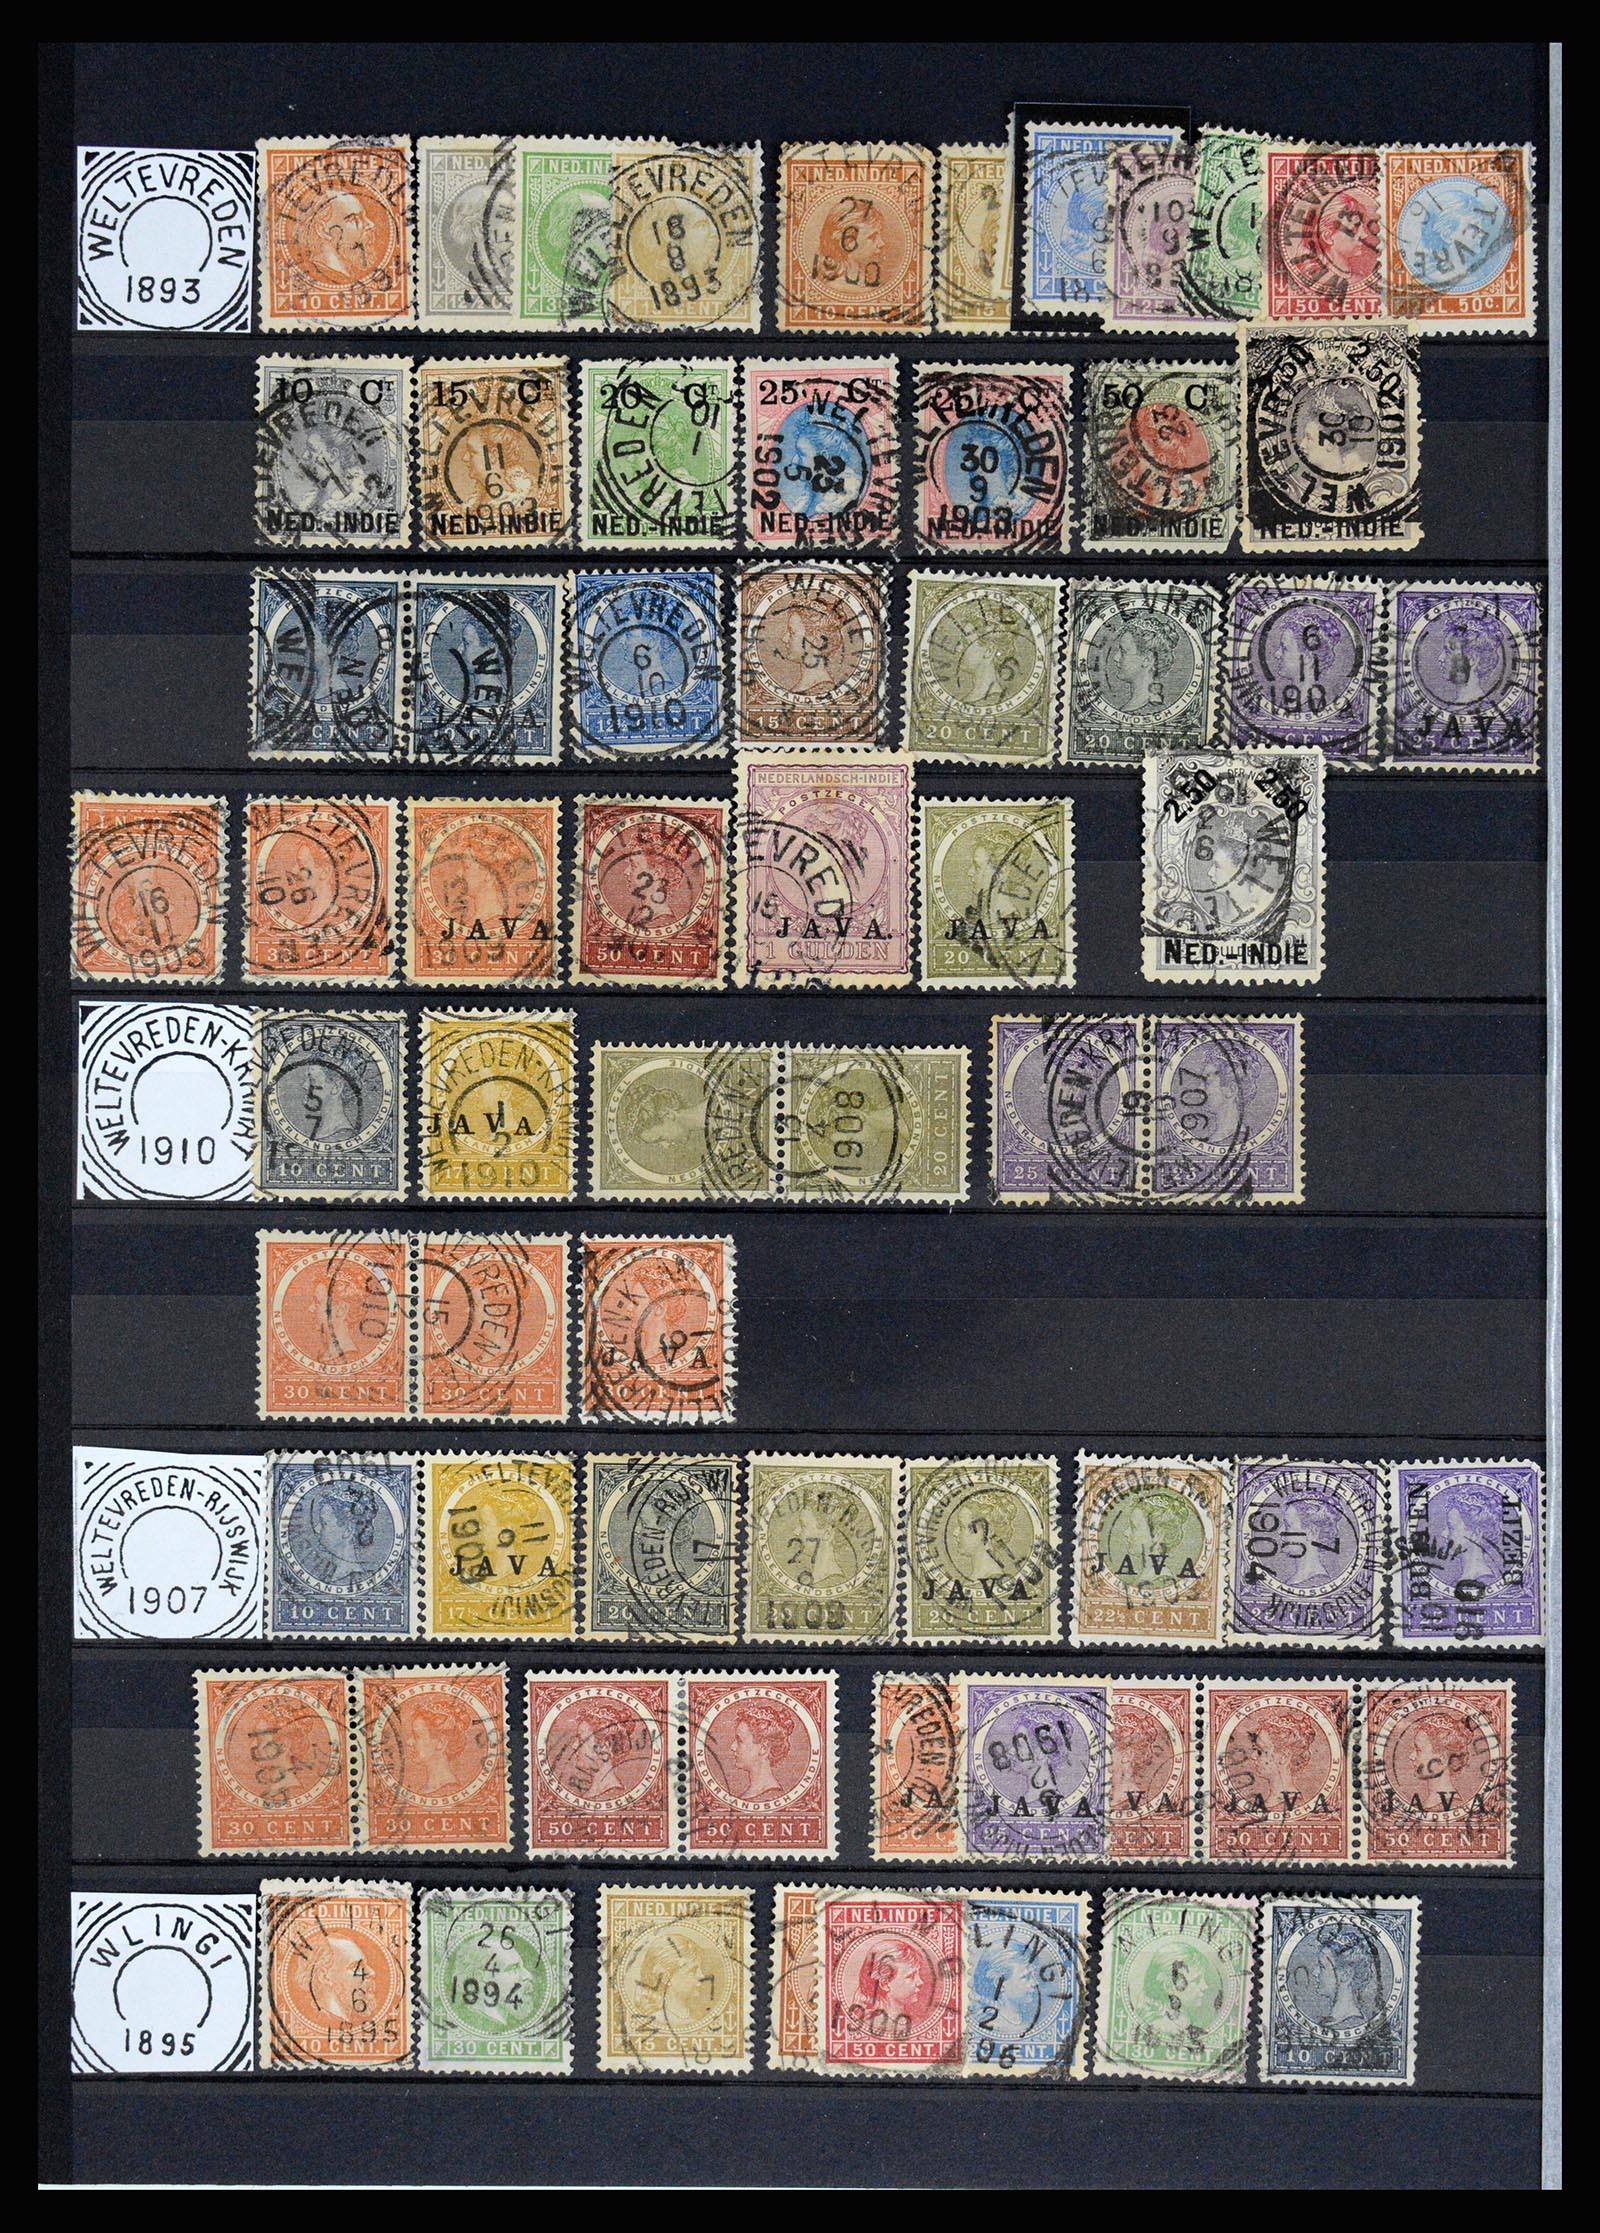 36839 057 - Stamp collection 36839 Dutch east Indies square cancels.